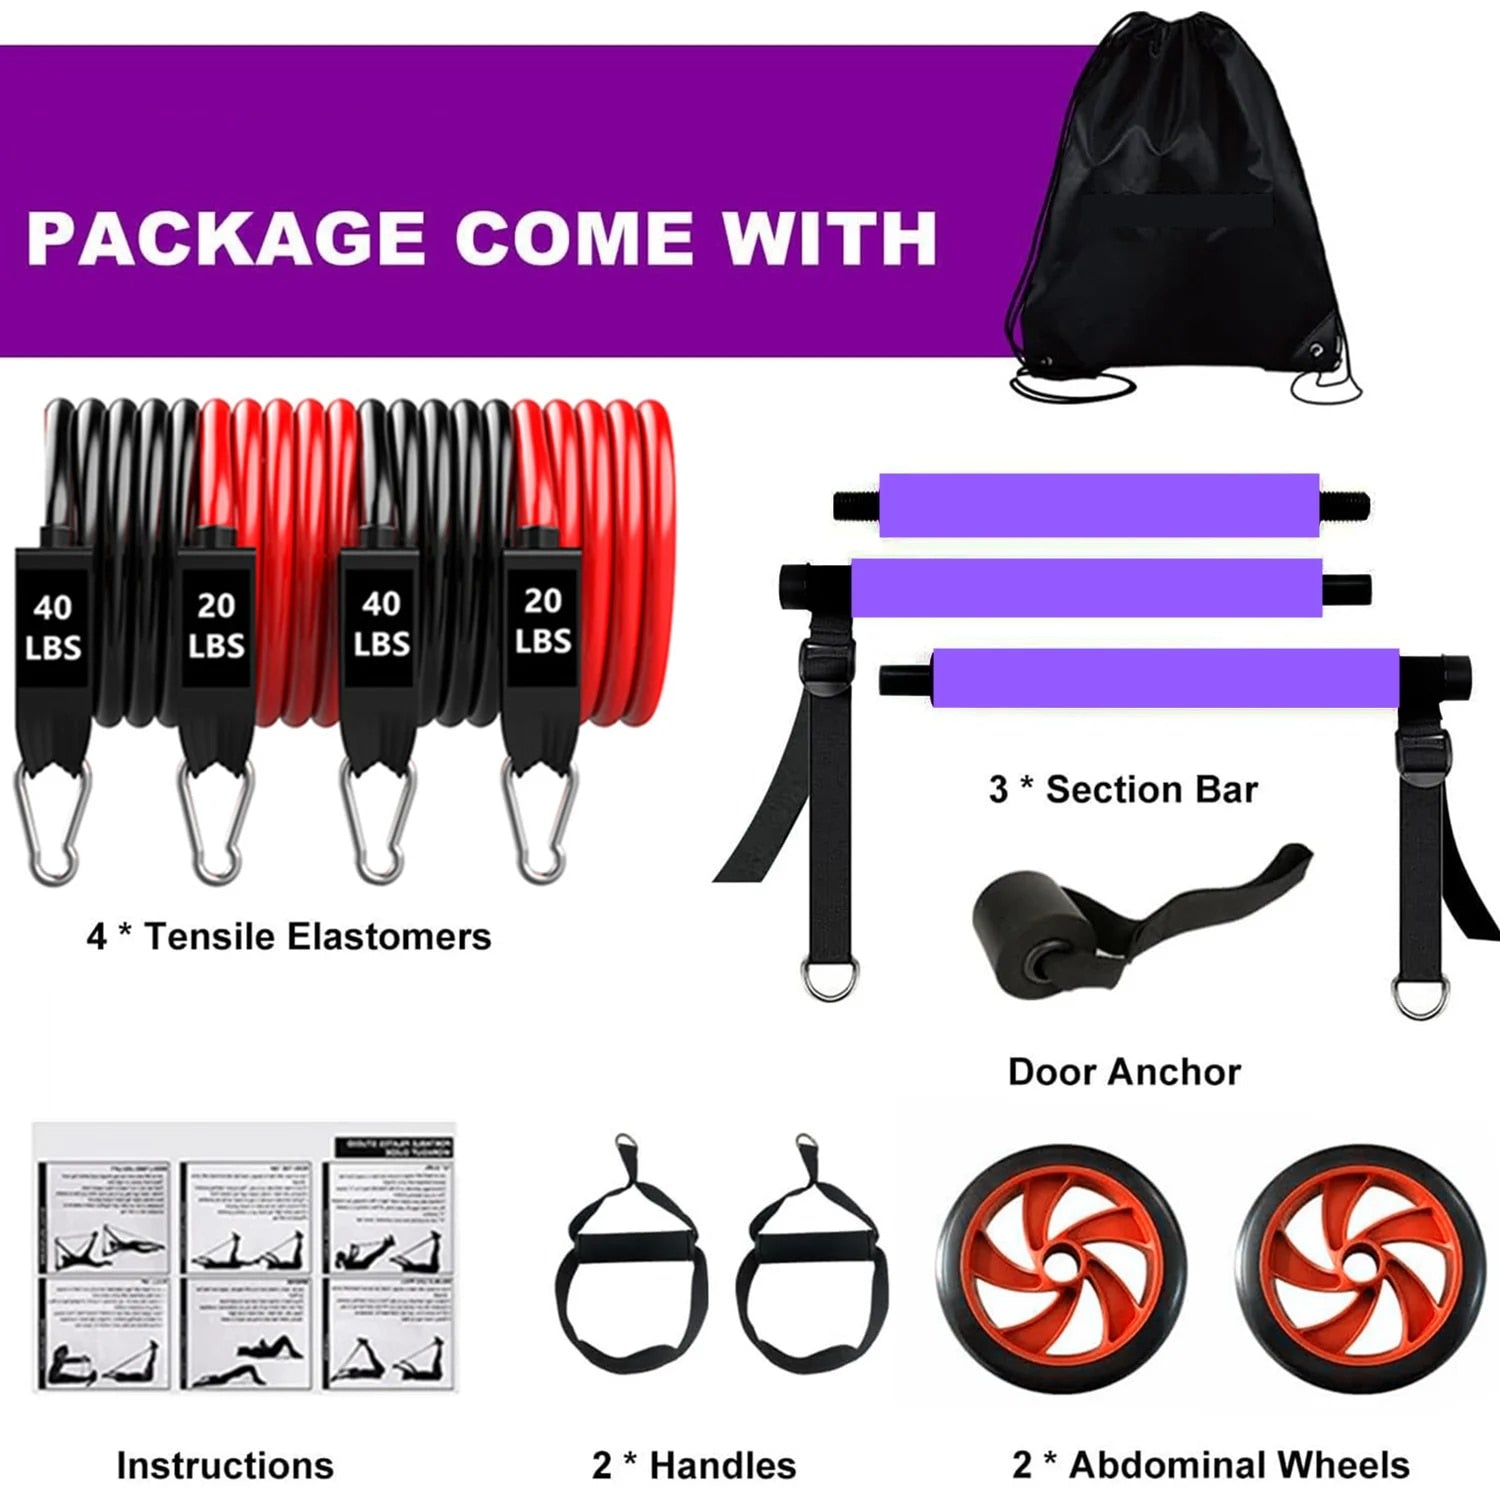 Fitness Pilates Bar Resistance Band Set with Rollers, Portable Exercise Equipment for Home Gym